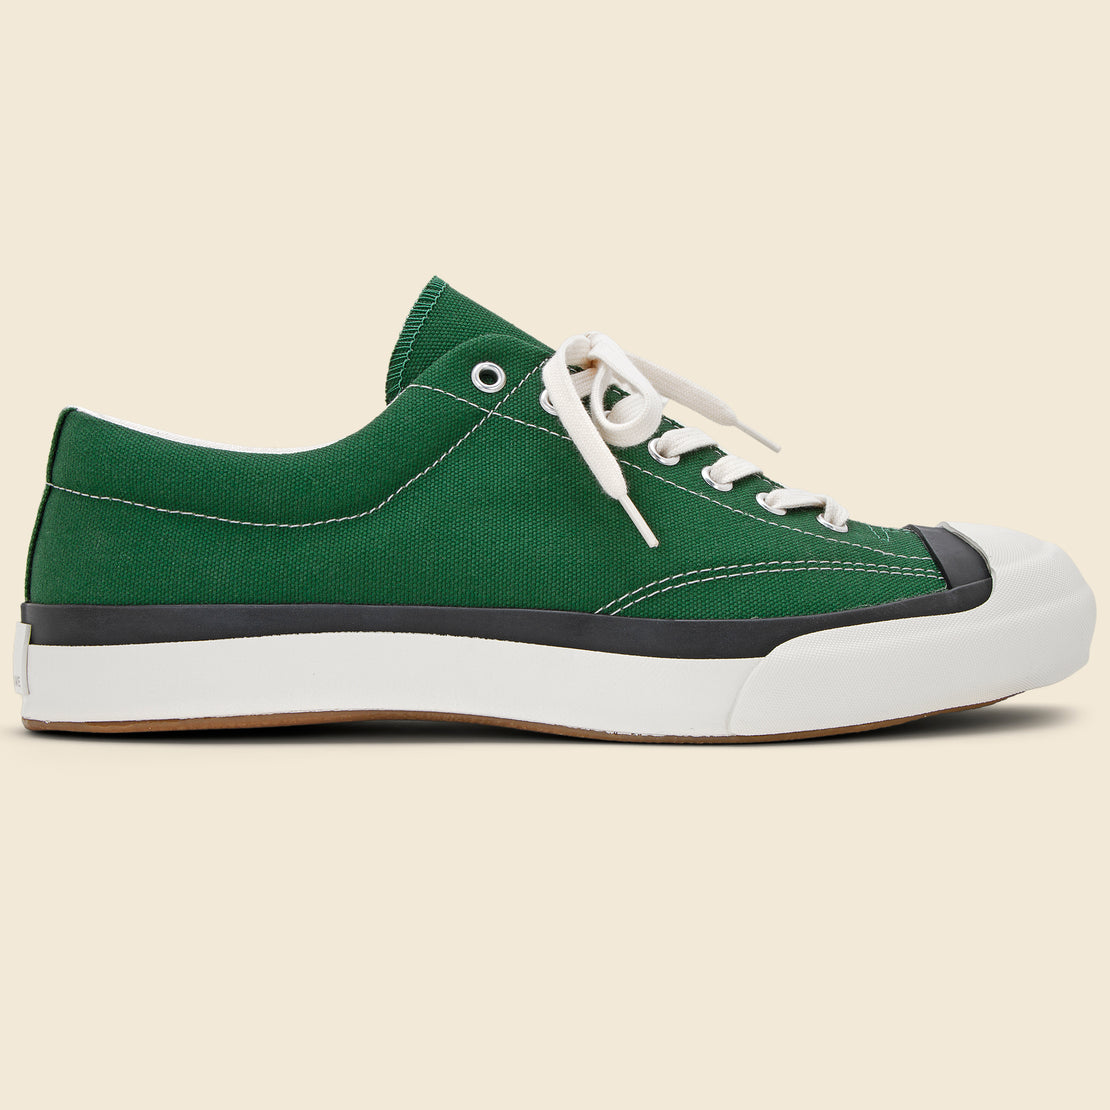 Shoes Like Pottery Gym Court (Moonstar) Sneaker - Green